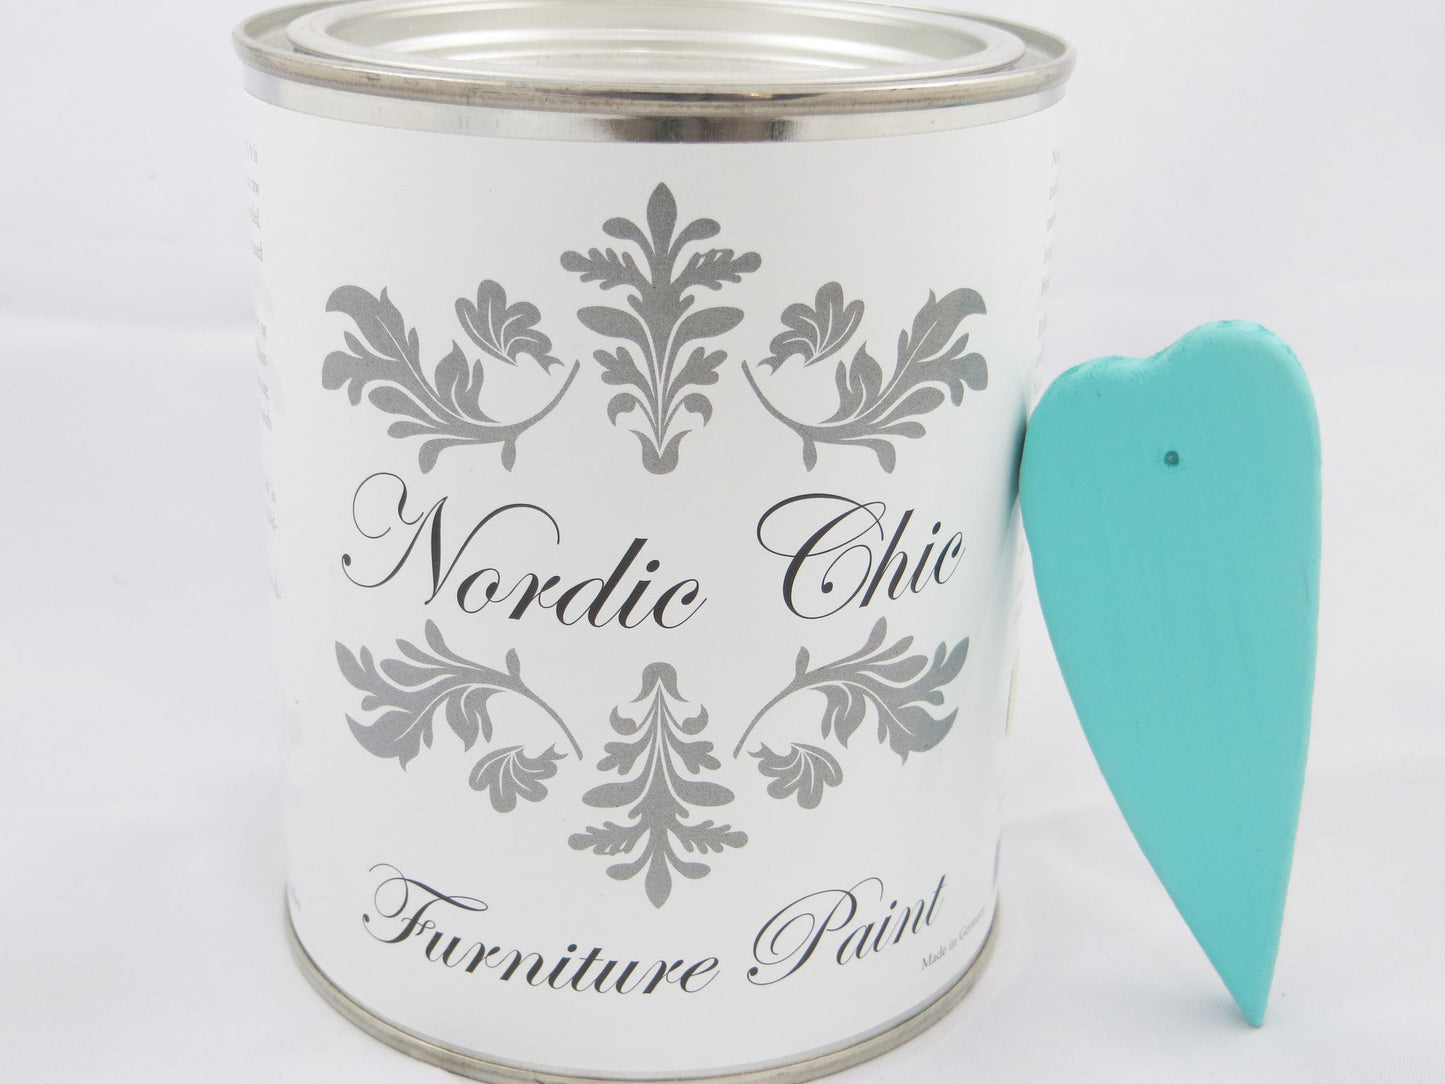 Nordic Chic Furniture Paint - Turkish Delight - Nordic Chic®